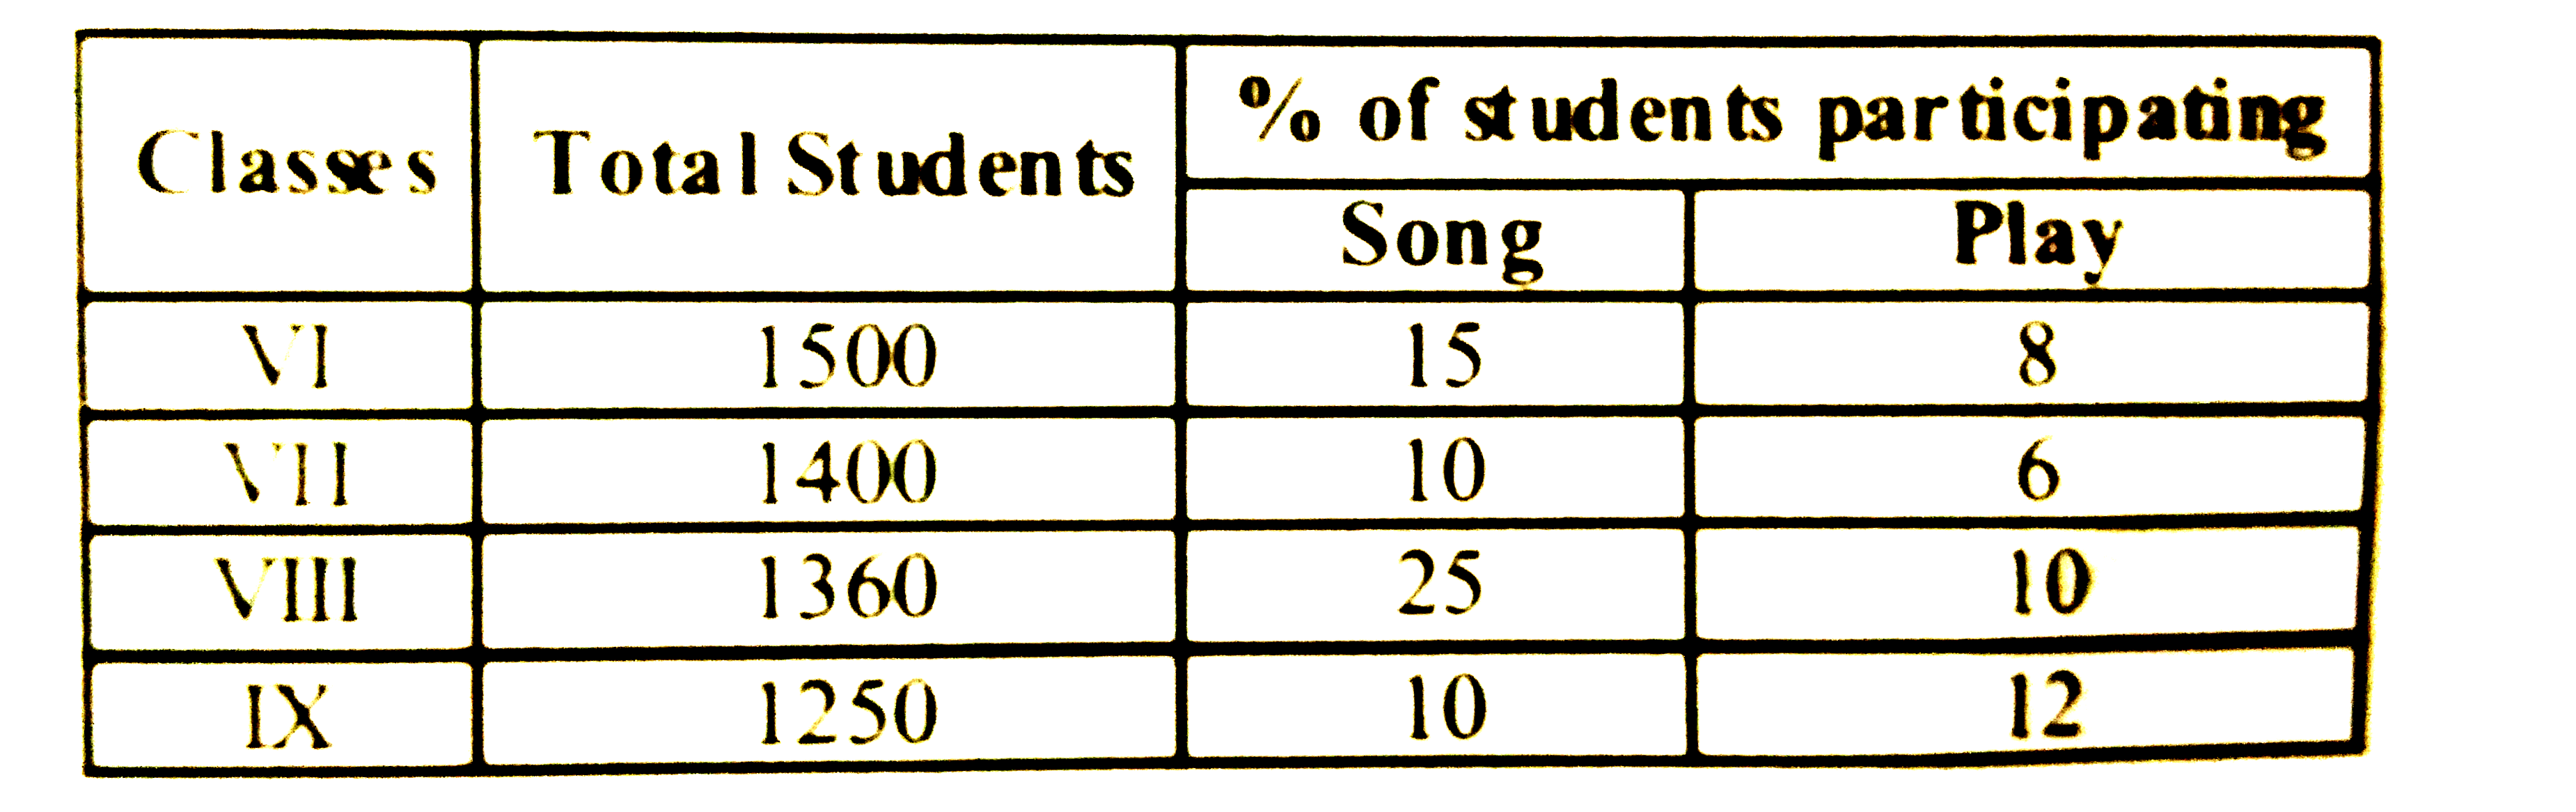 What is the ratio of students participating in Song from Class VII and IX together to the students participating in Play from class VI and VIII together ?